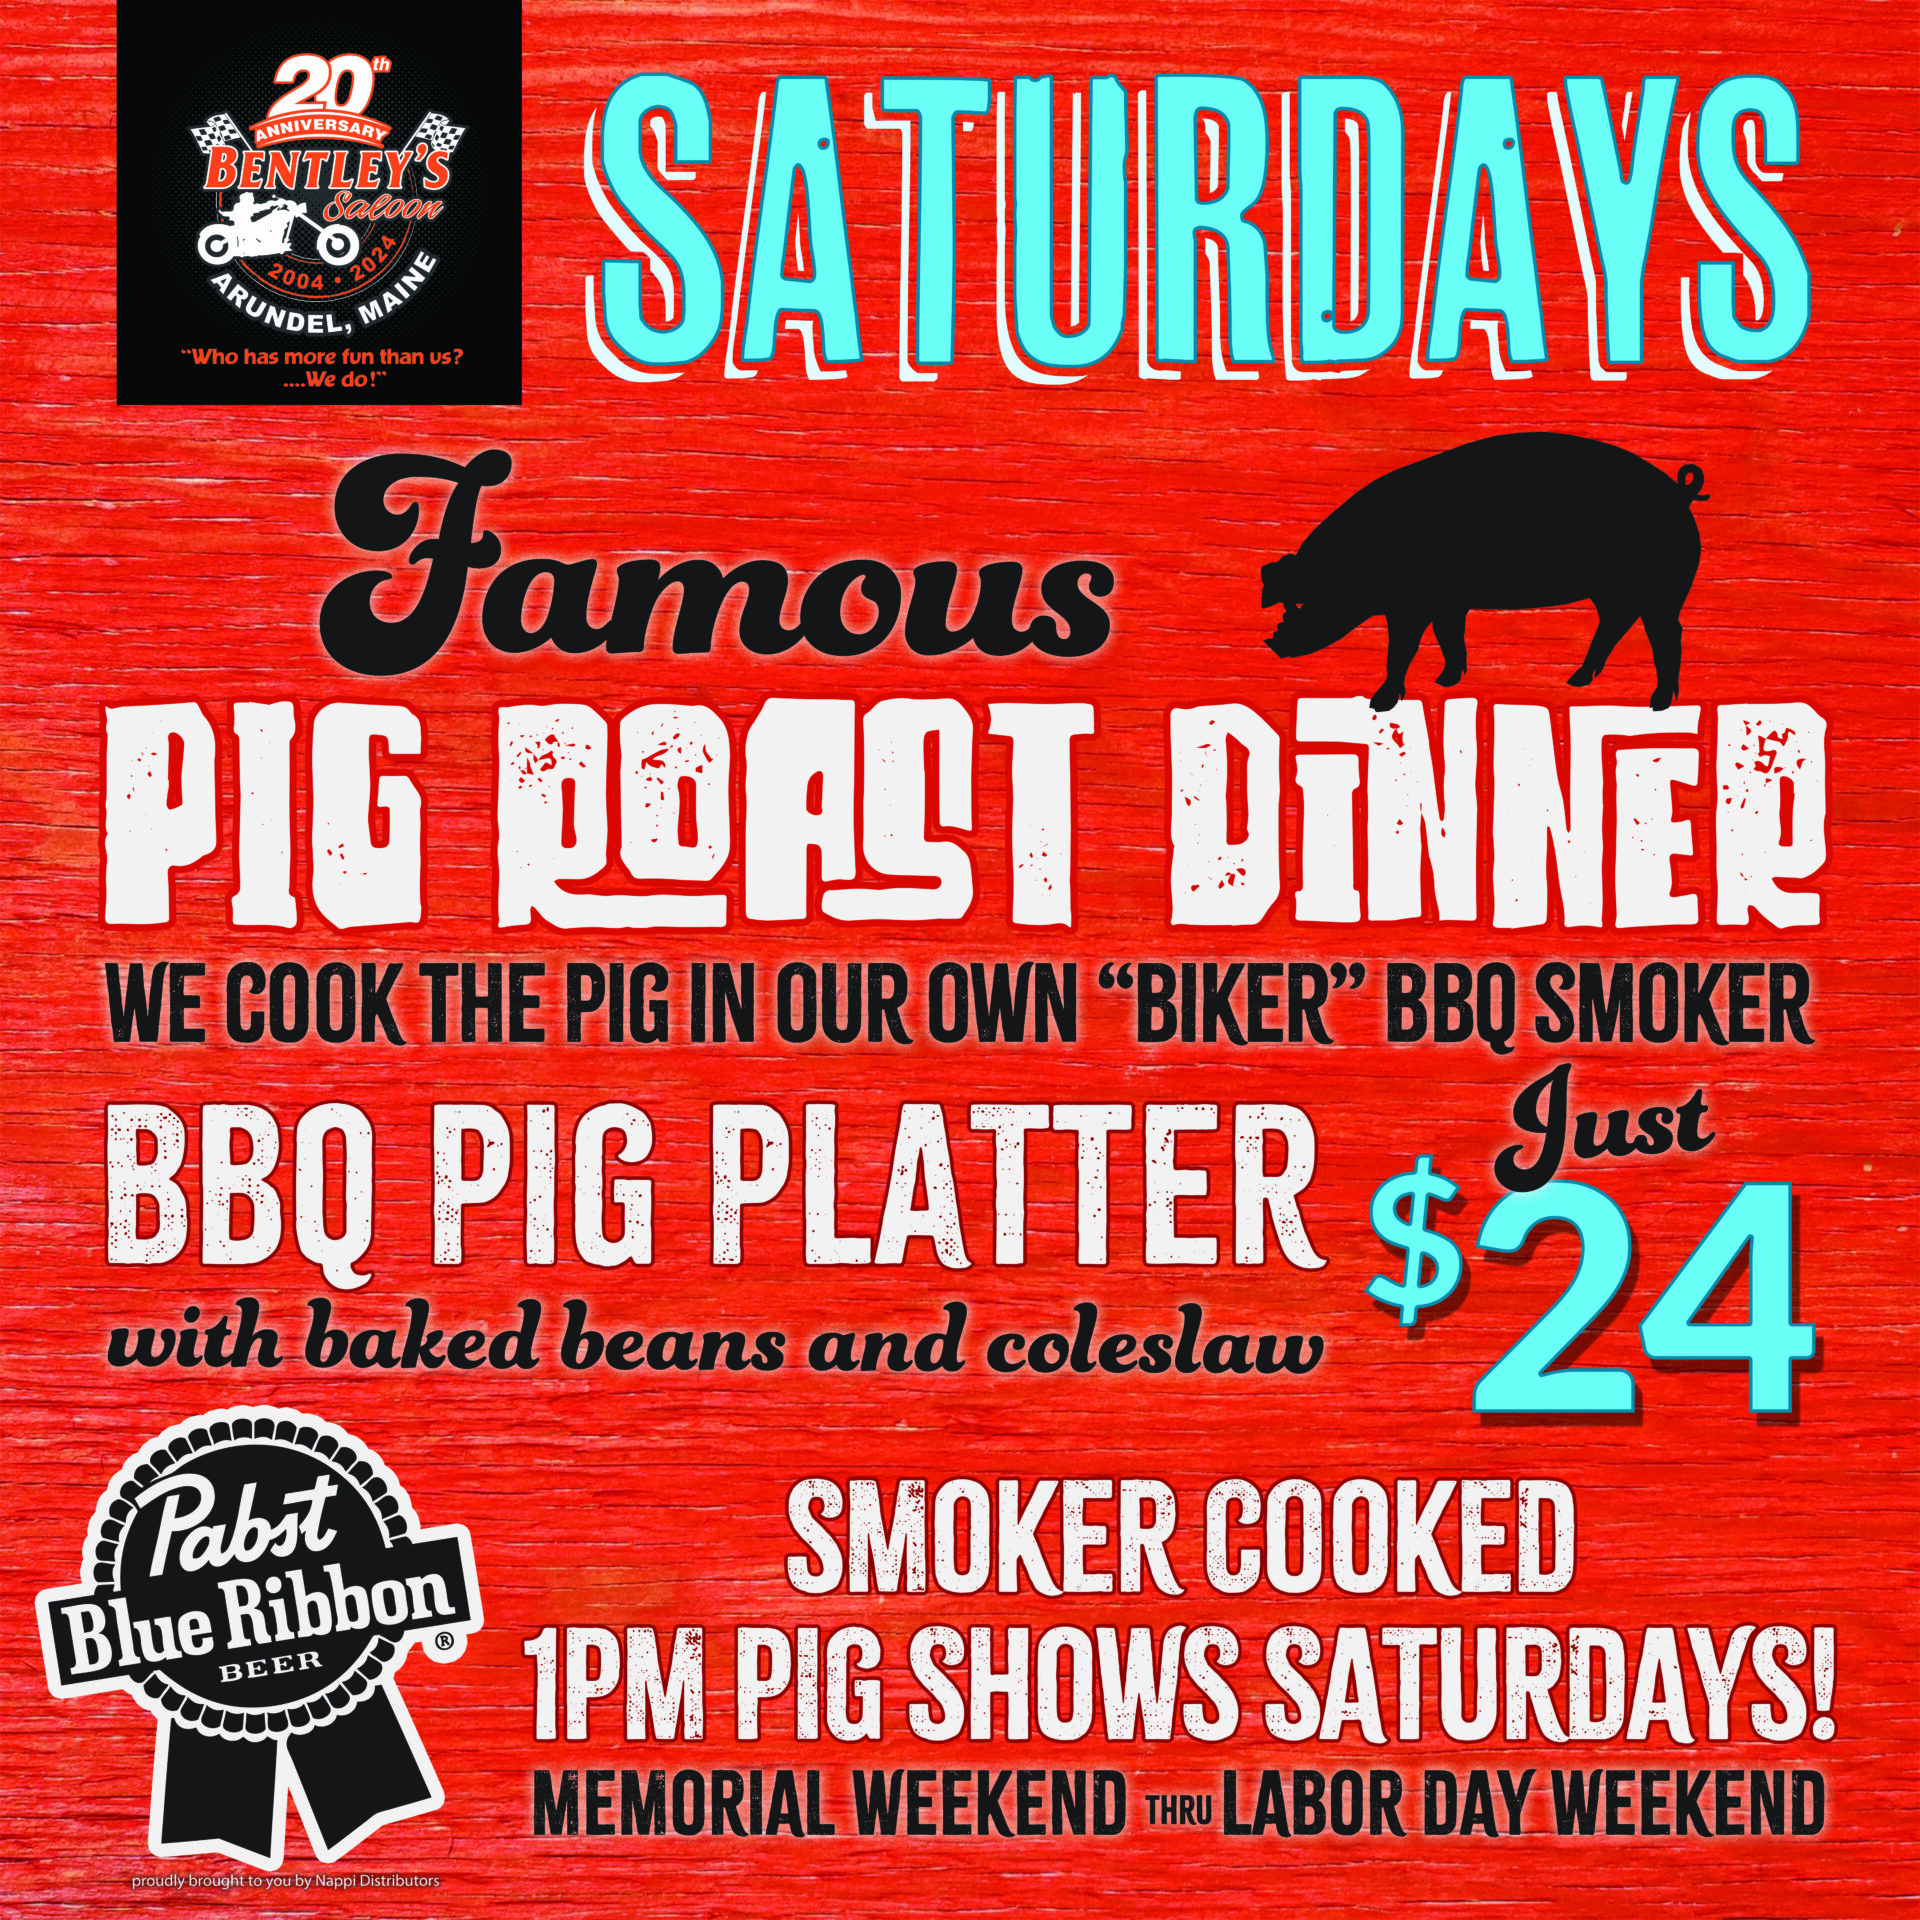 A poster for the pig roast dinner and bbq.